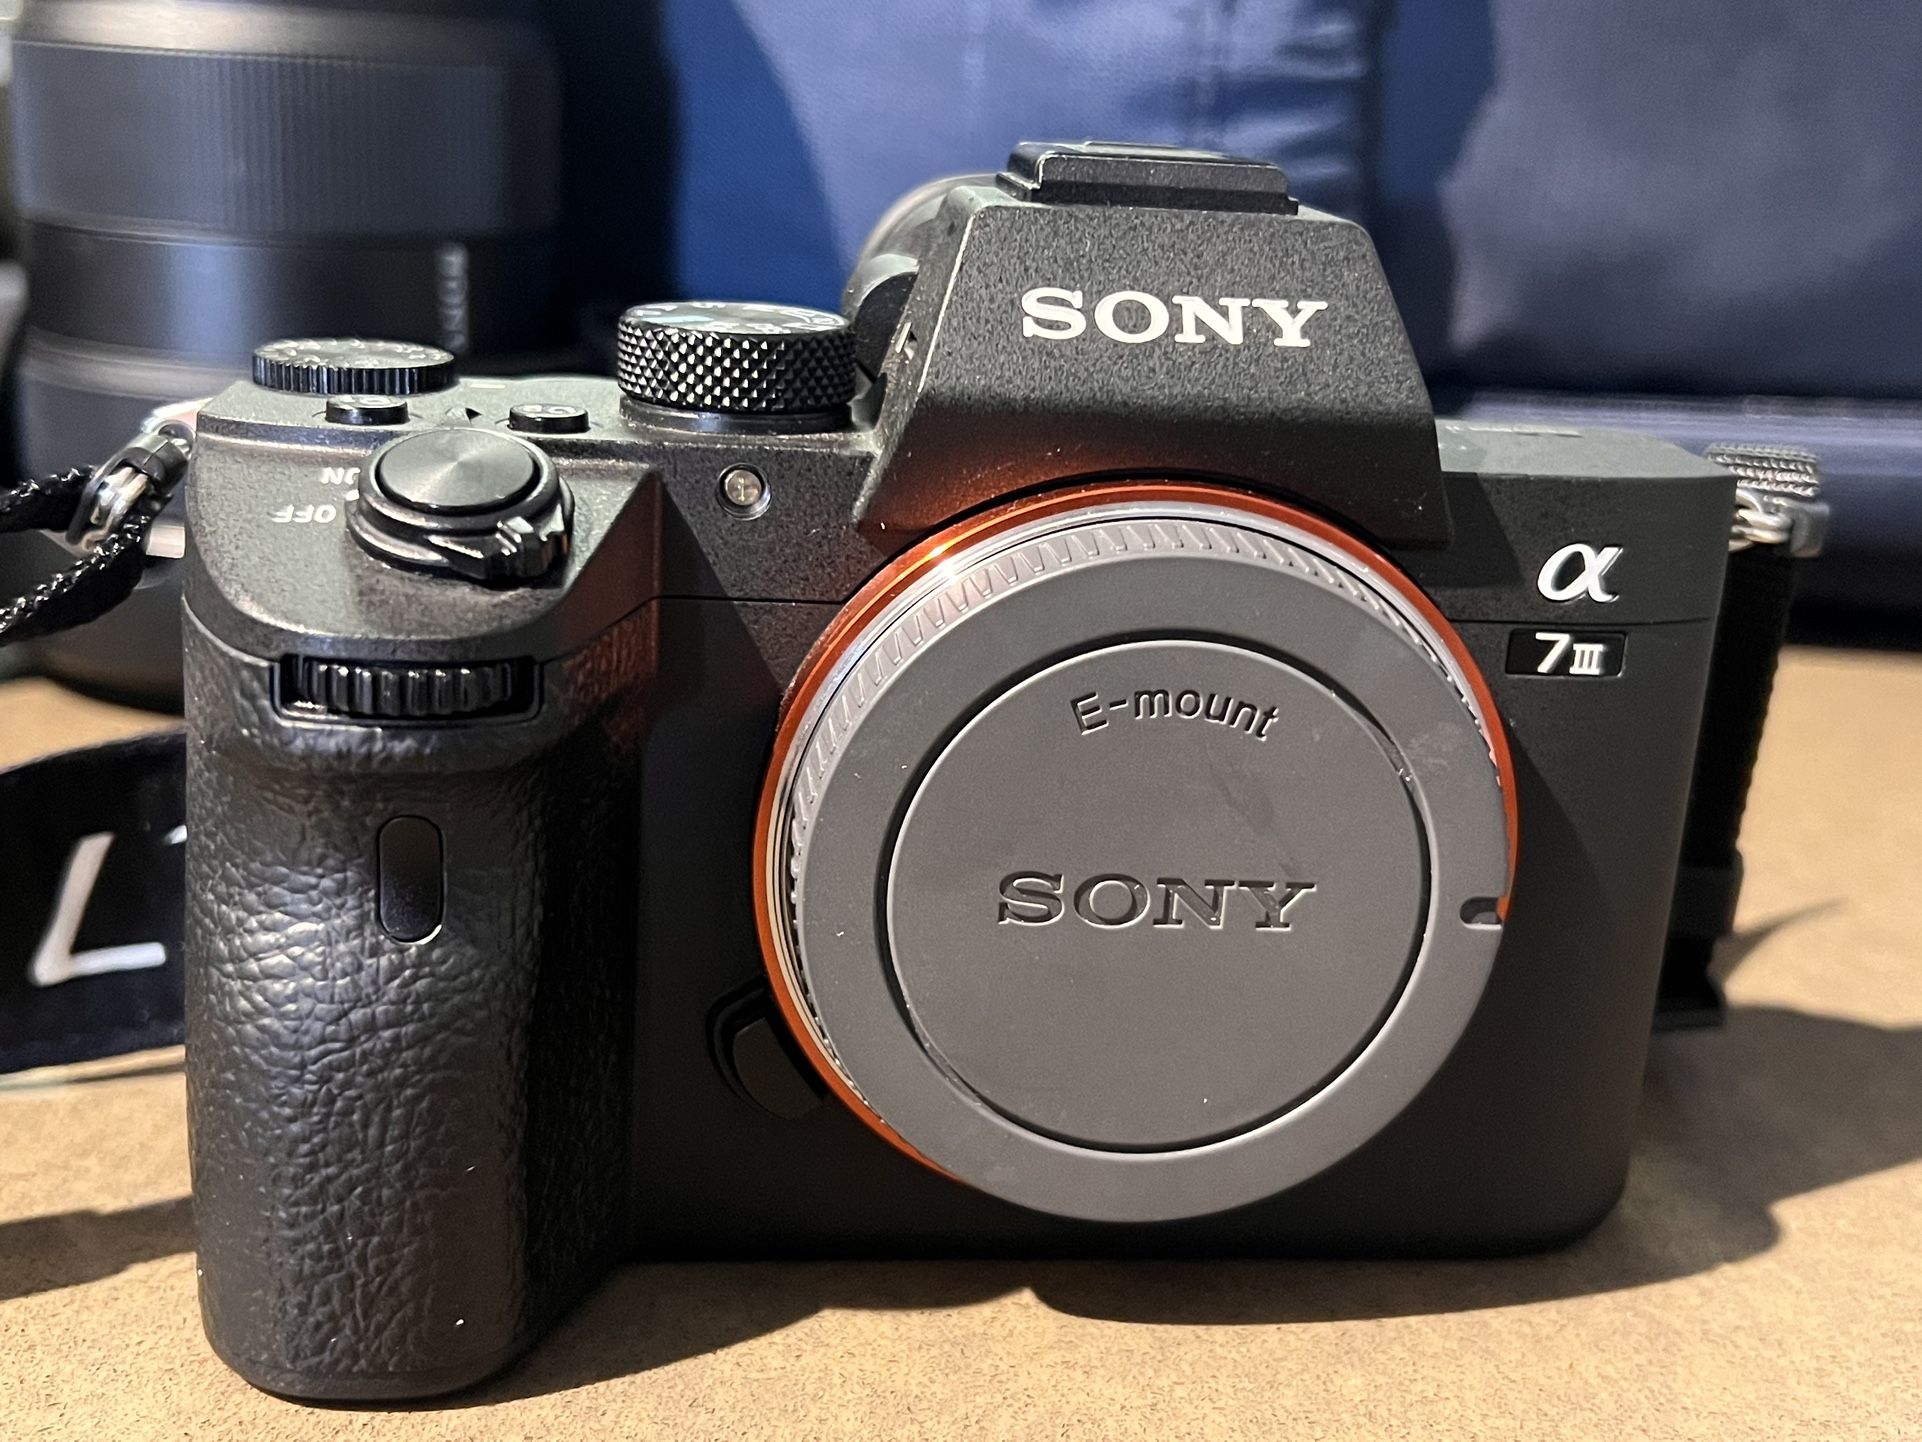 Sony E-Mount Camera Lens: FE 24-70 mm F2.8 G Master Full Frame with Sony a7 III ILCE7M3/B Full-Frame Mirrorless